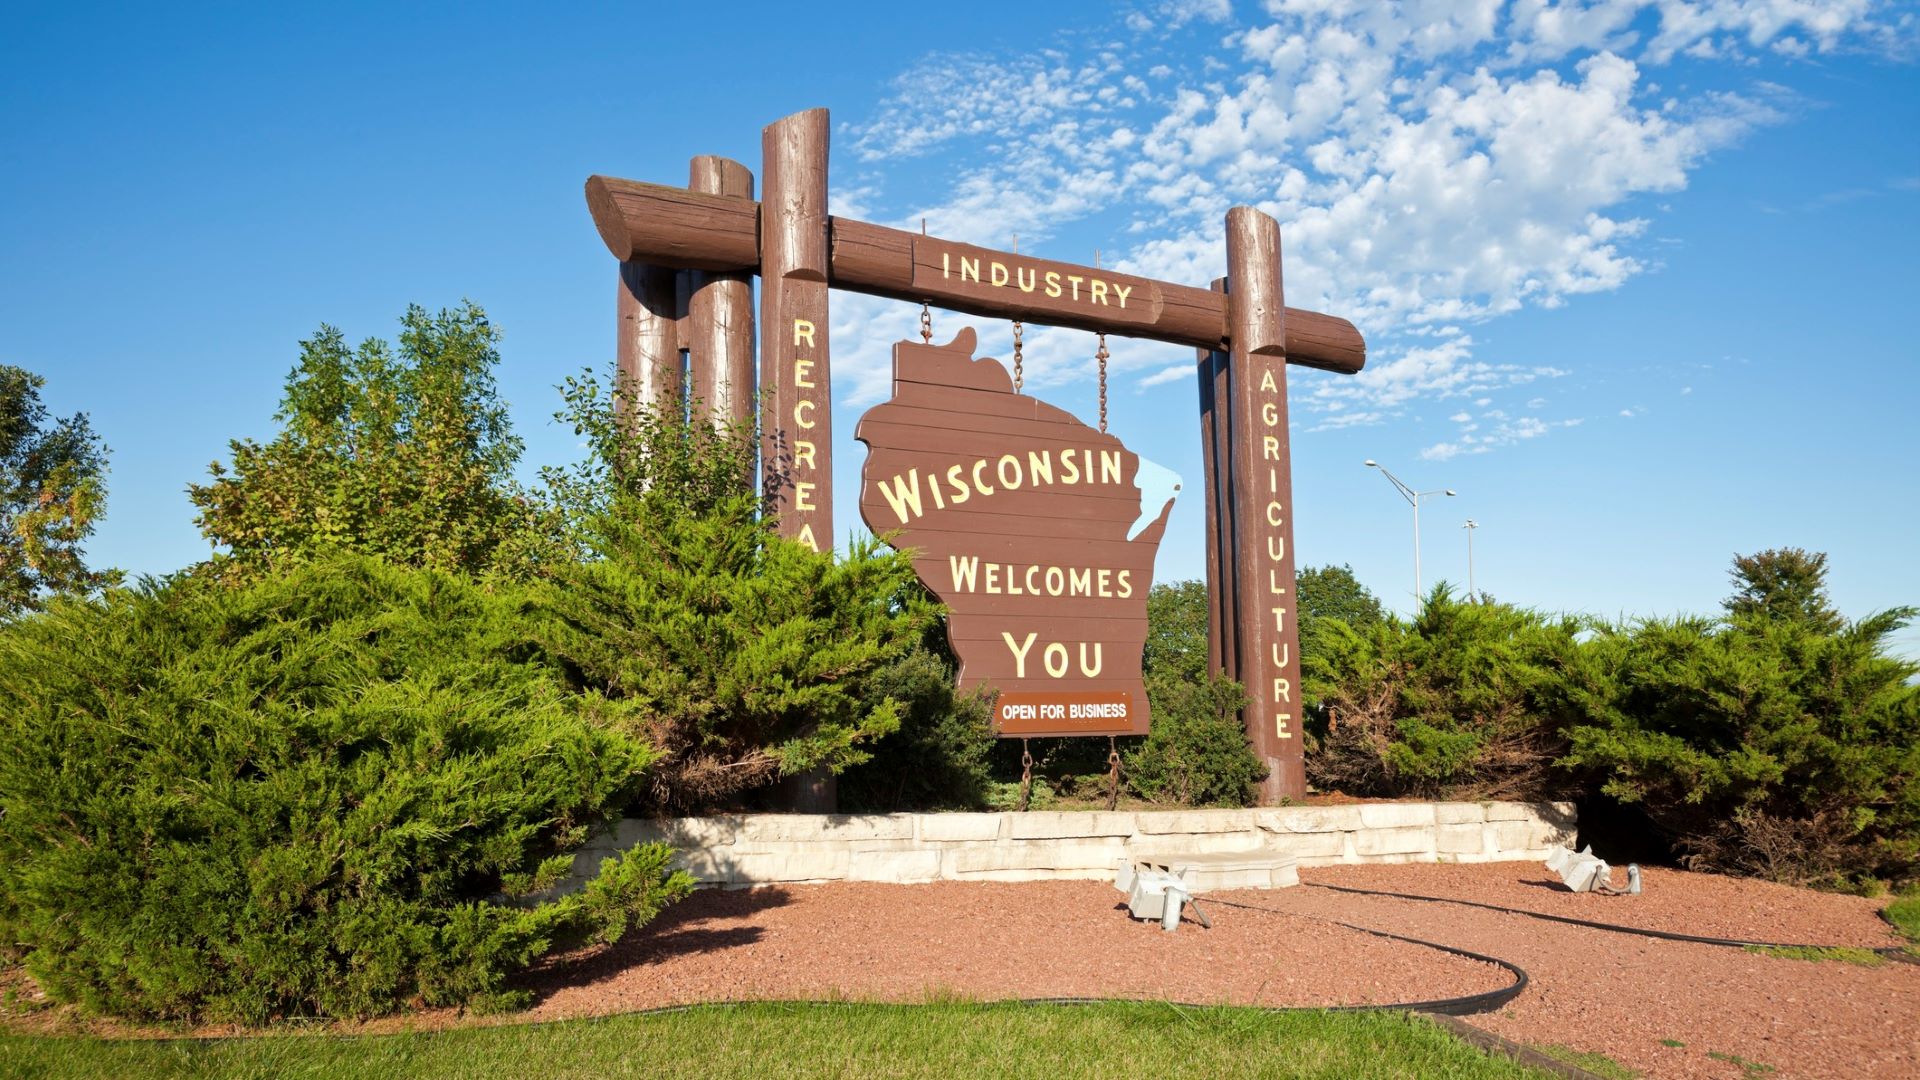 <ul> <li>Population: 25,242</li> <li>Total crime rate per 1,000 residents: 3.8</li> <li>Annual expenditures: $22,228</li> </ul> <p>Muskego has regularly turned up on lists of Wisconsin's safest and most affordable cities. In 2018, PennyGeeks.com picked the Milwaukee suburb as the third-best place to buy a home in the whole country.</p> <p>Muskego's housing cost ($30,361) is on the higher end among the cities in our top 15. You'll pay about $442 a month for groceries.</p>